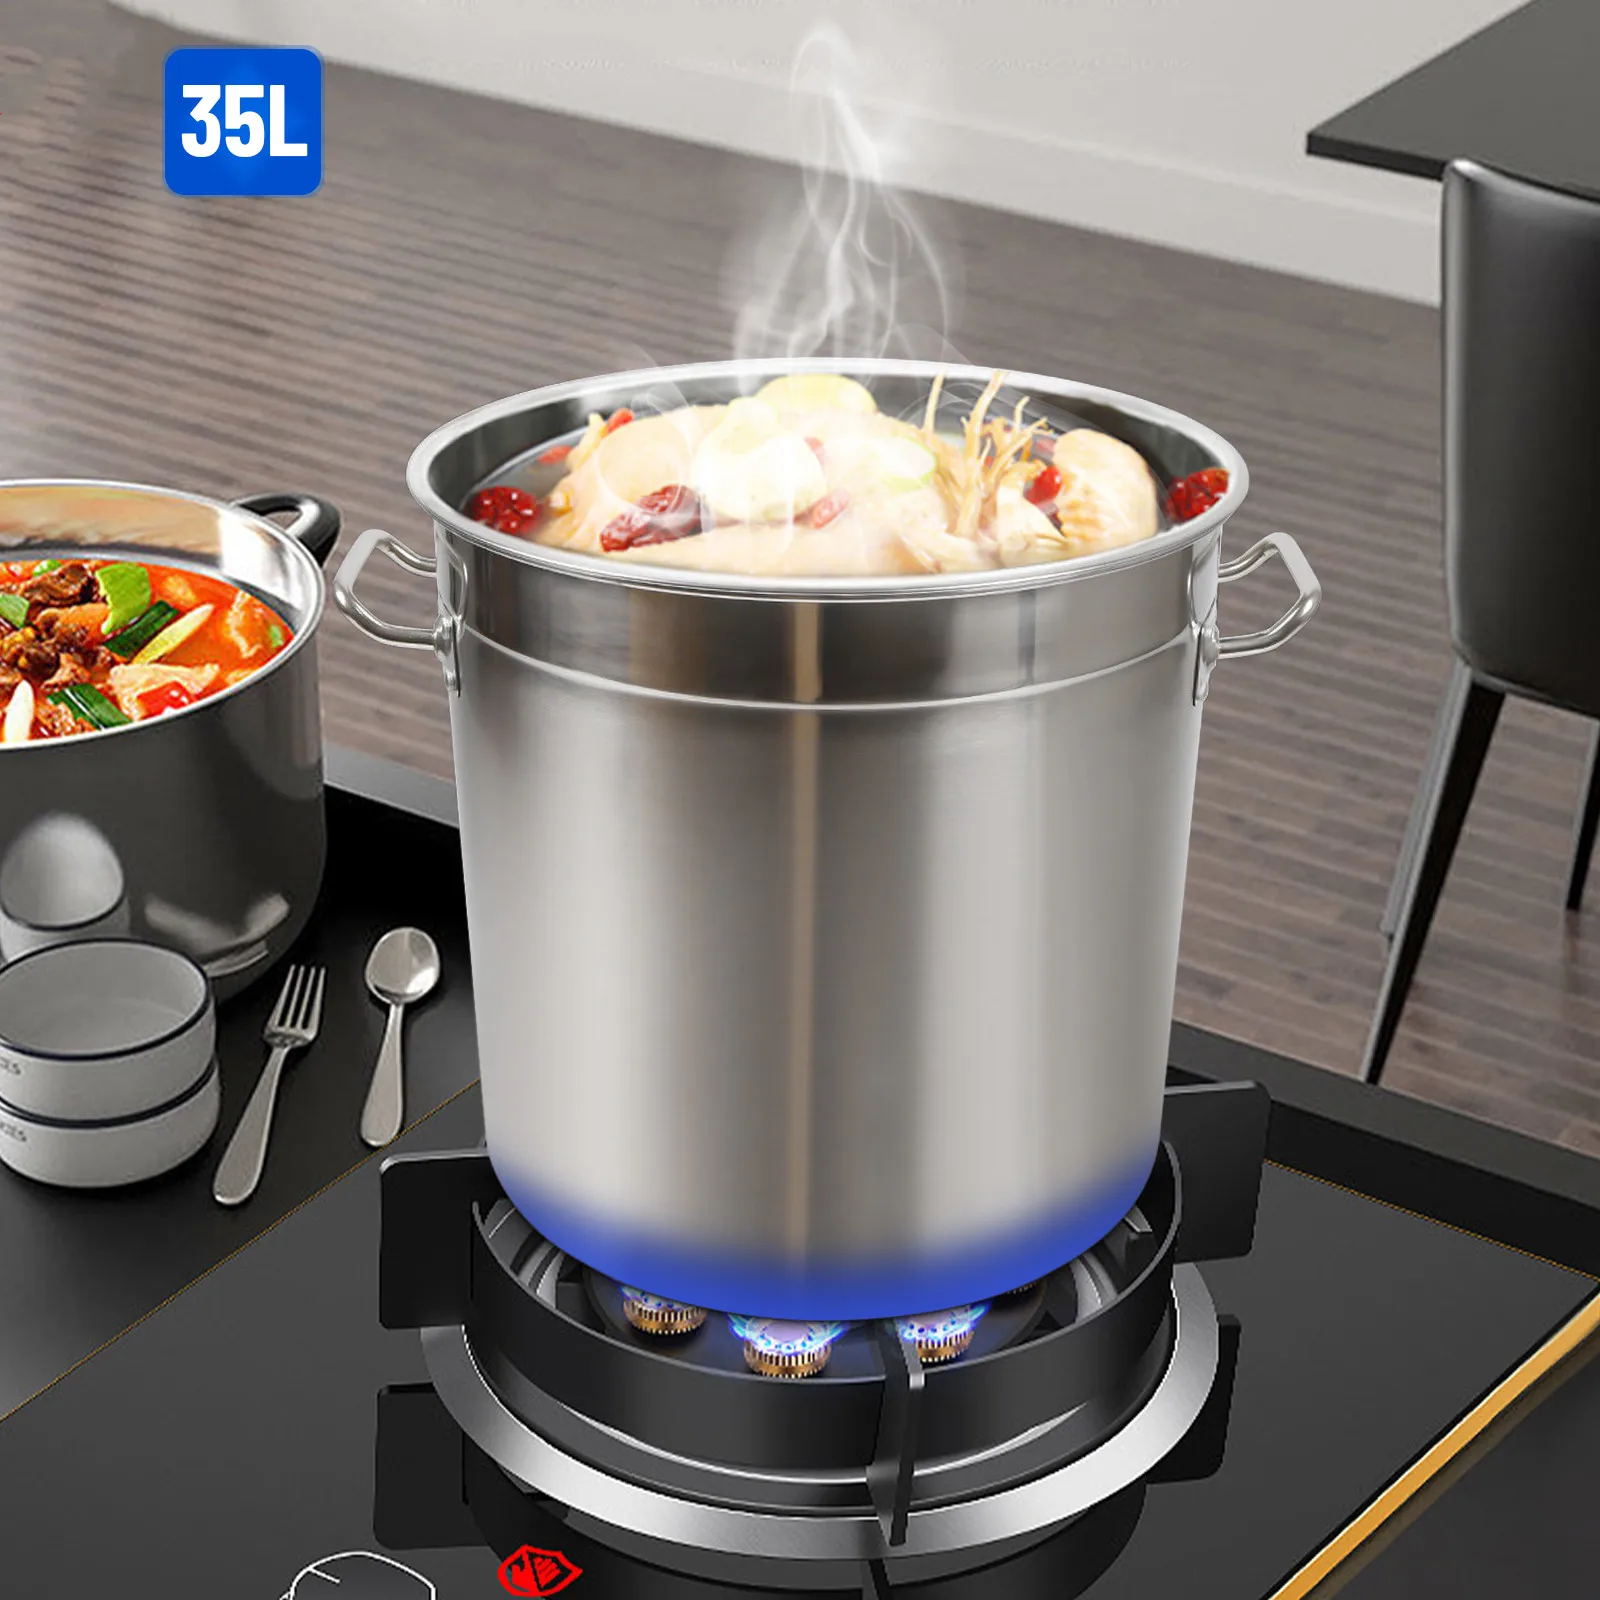 https://ae01.alicdn.com/kf/Se7f4fc03f884490fa6acc8ef74a010b5Q/35L-9-25Gal-Large-Stainless-Steel-Deep-Stock-Pot-w-Lid-Boiling-Stew-Soup-Cooking-Stock.jpg